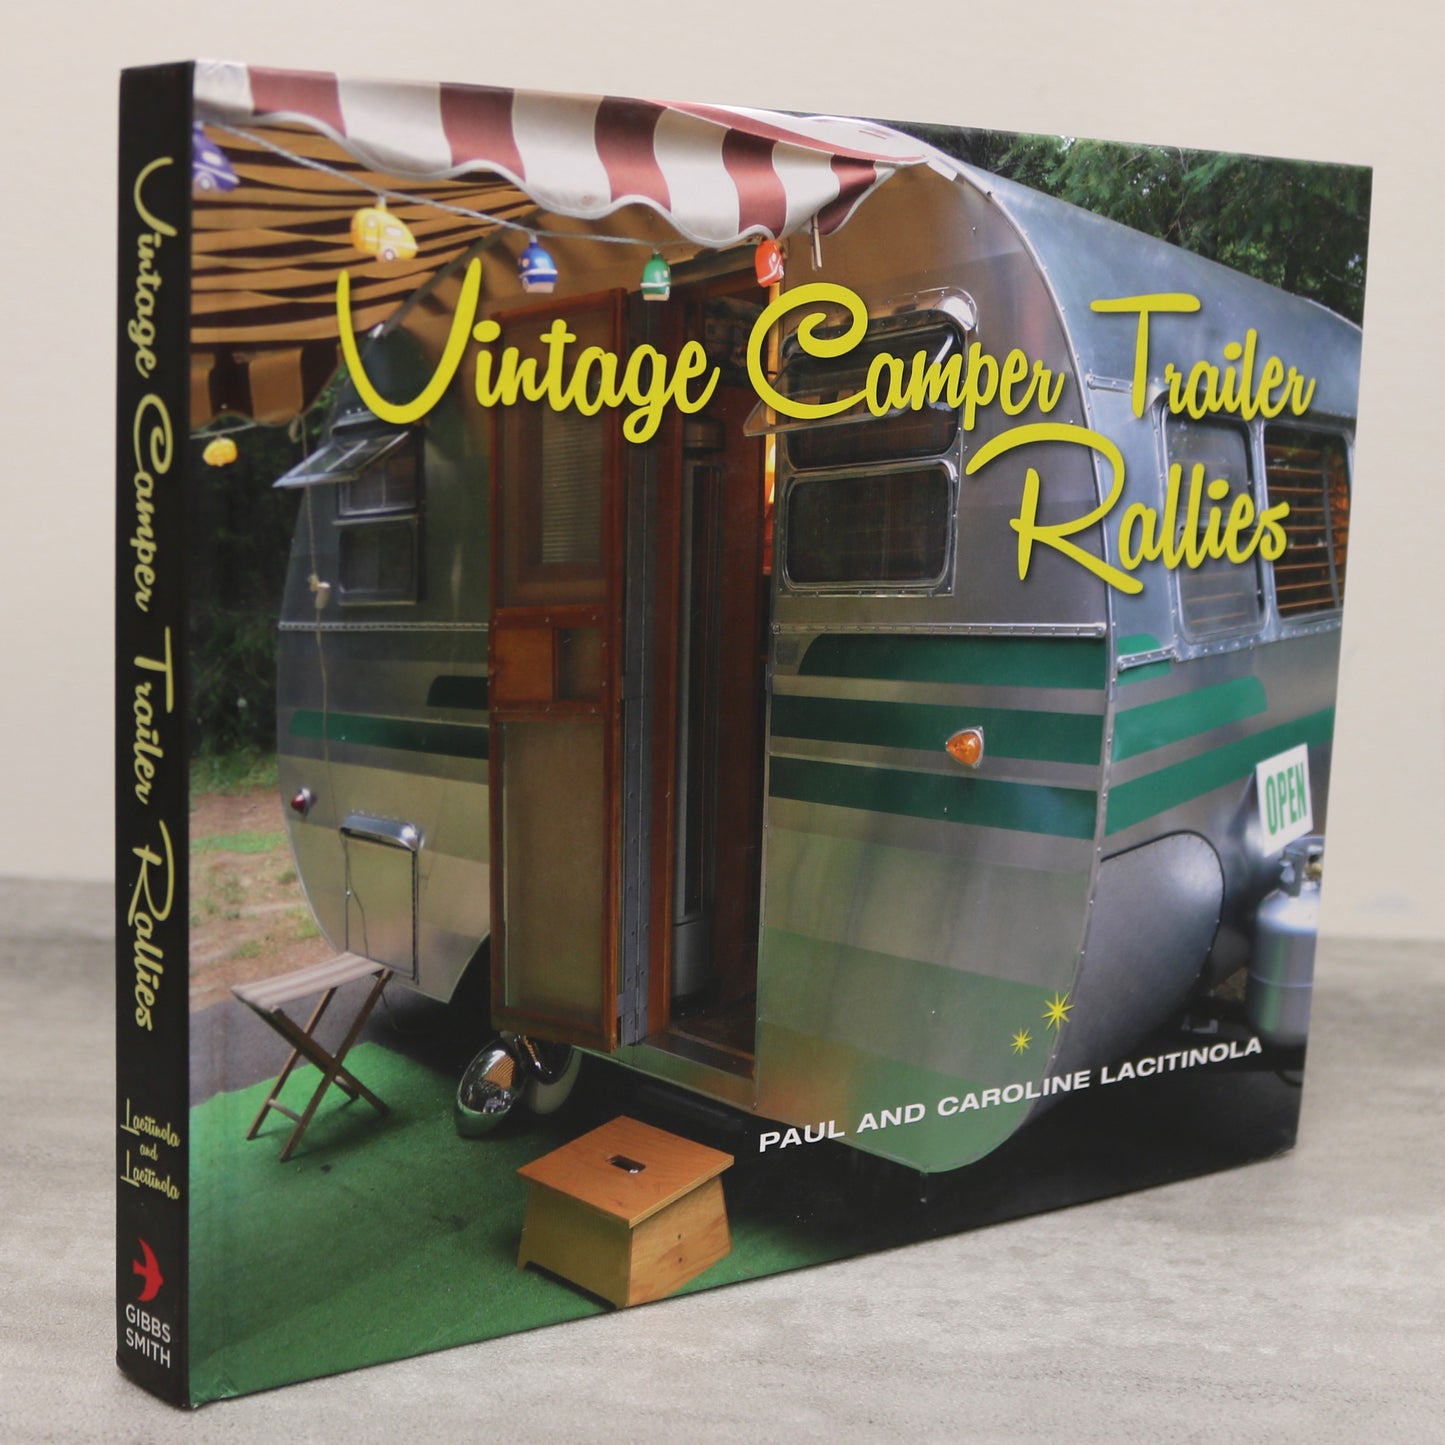 Vintage Camper Trailer Rallies Camping Travel Campervans Collectible Vehicles Used Book